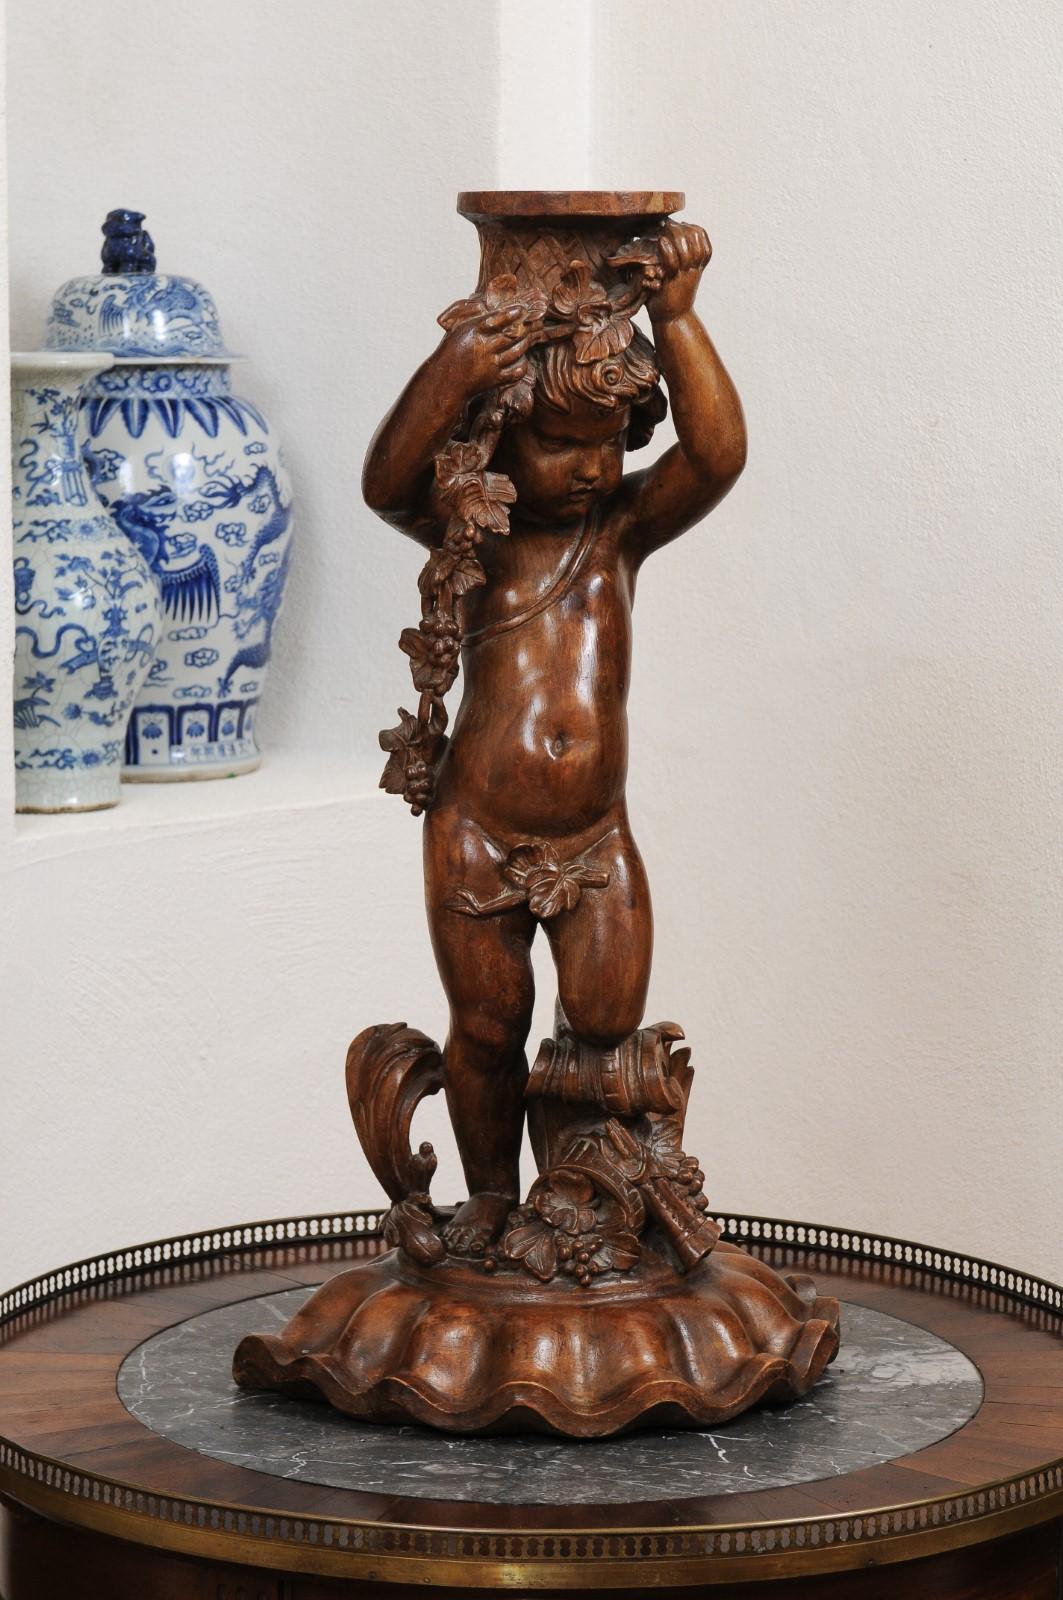 A French Napoléon III period walnut carved putto sculpture from the mid 19th century, with grapes, flowers and the double flute. Created in France during the third quarter of the 19th century, this carved walnut sculpture depicts a putto draped with